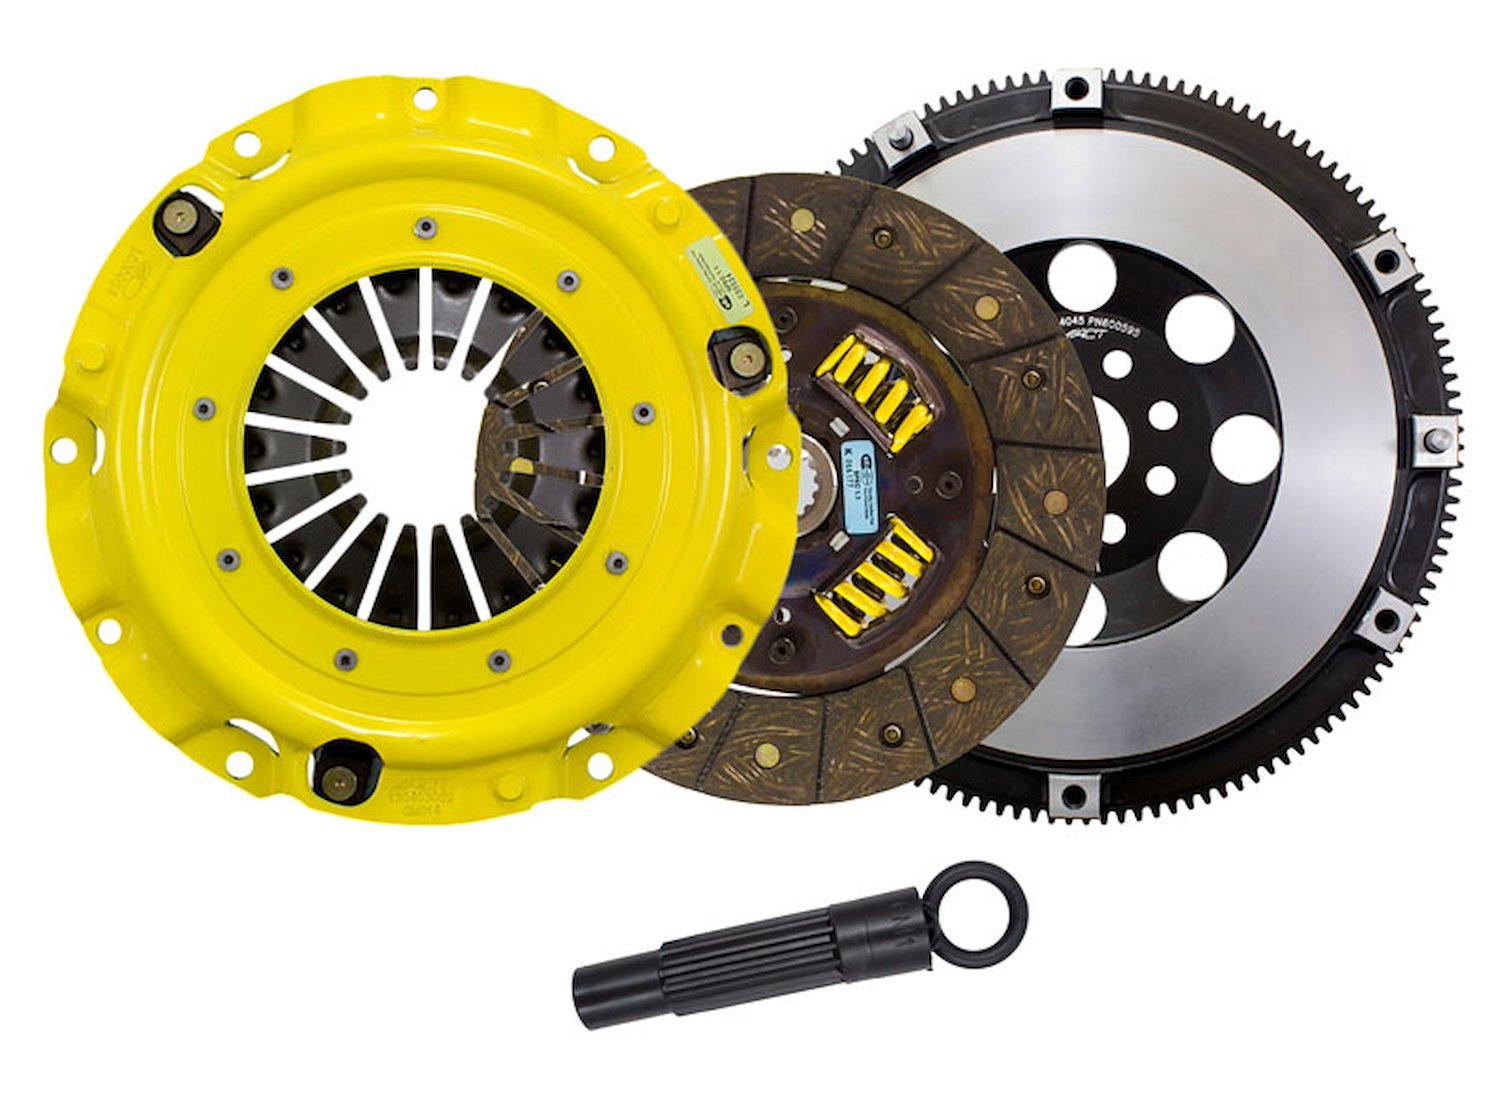 HD/Performance Street Sprung Transmission Clutch Kit Fits Select GM